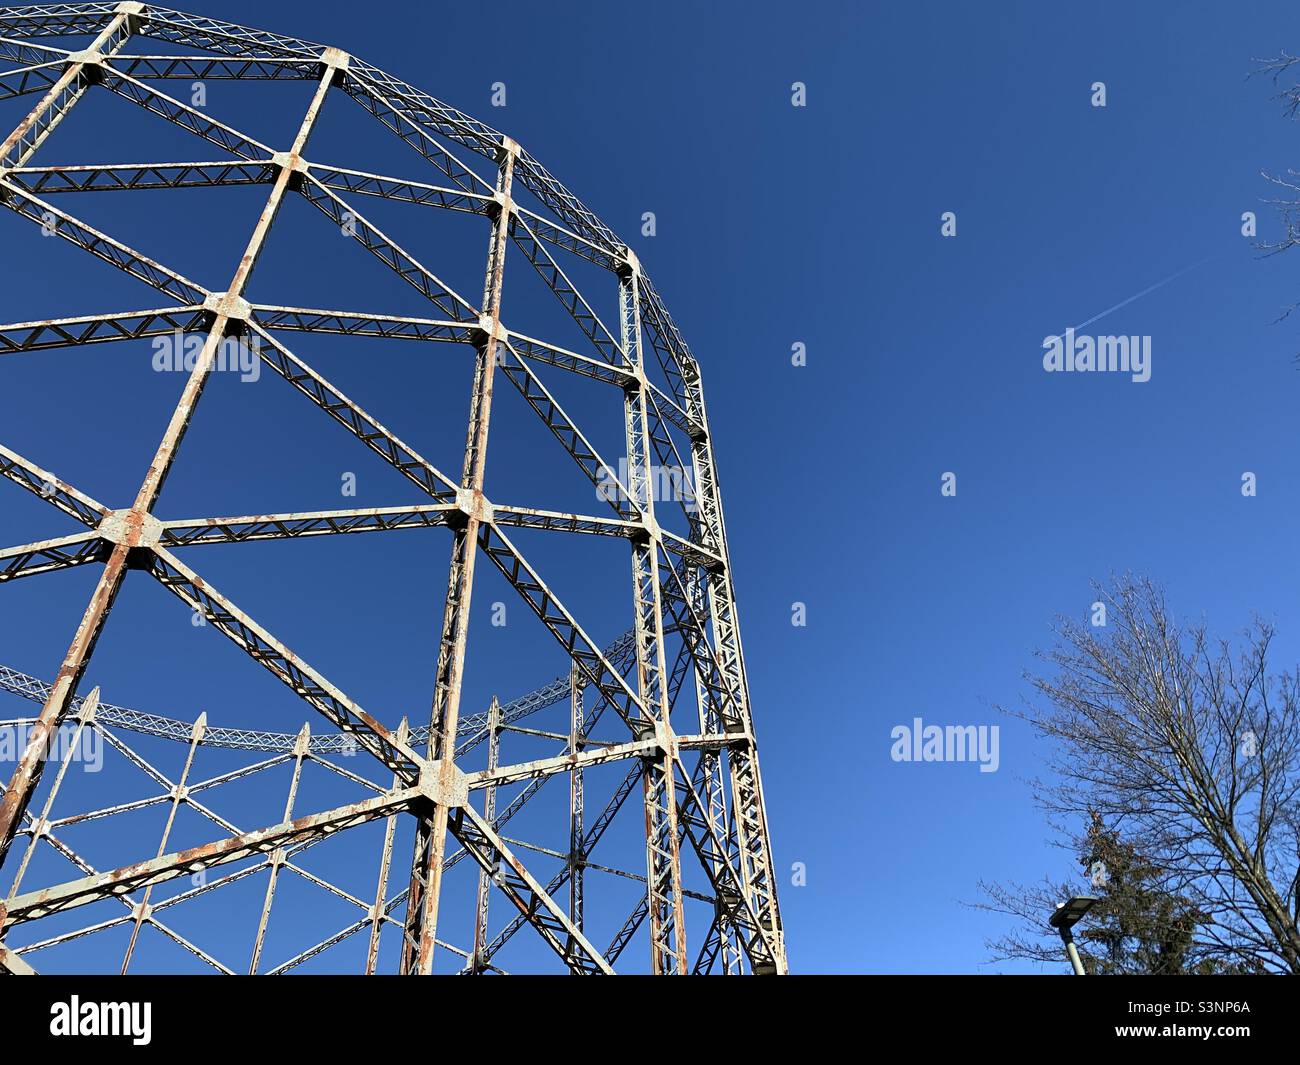 Disused Gasometer against deep blue sky Stock Photo